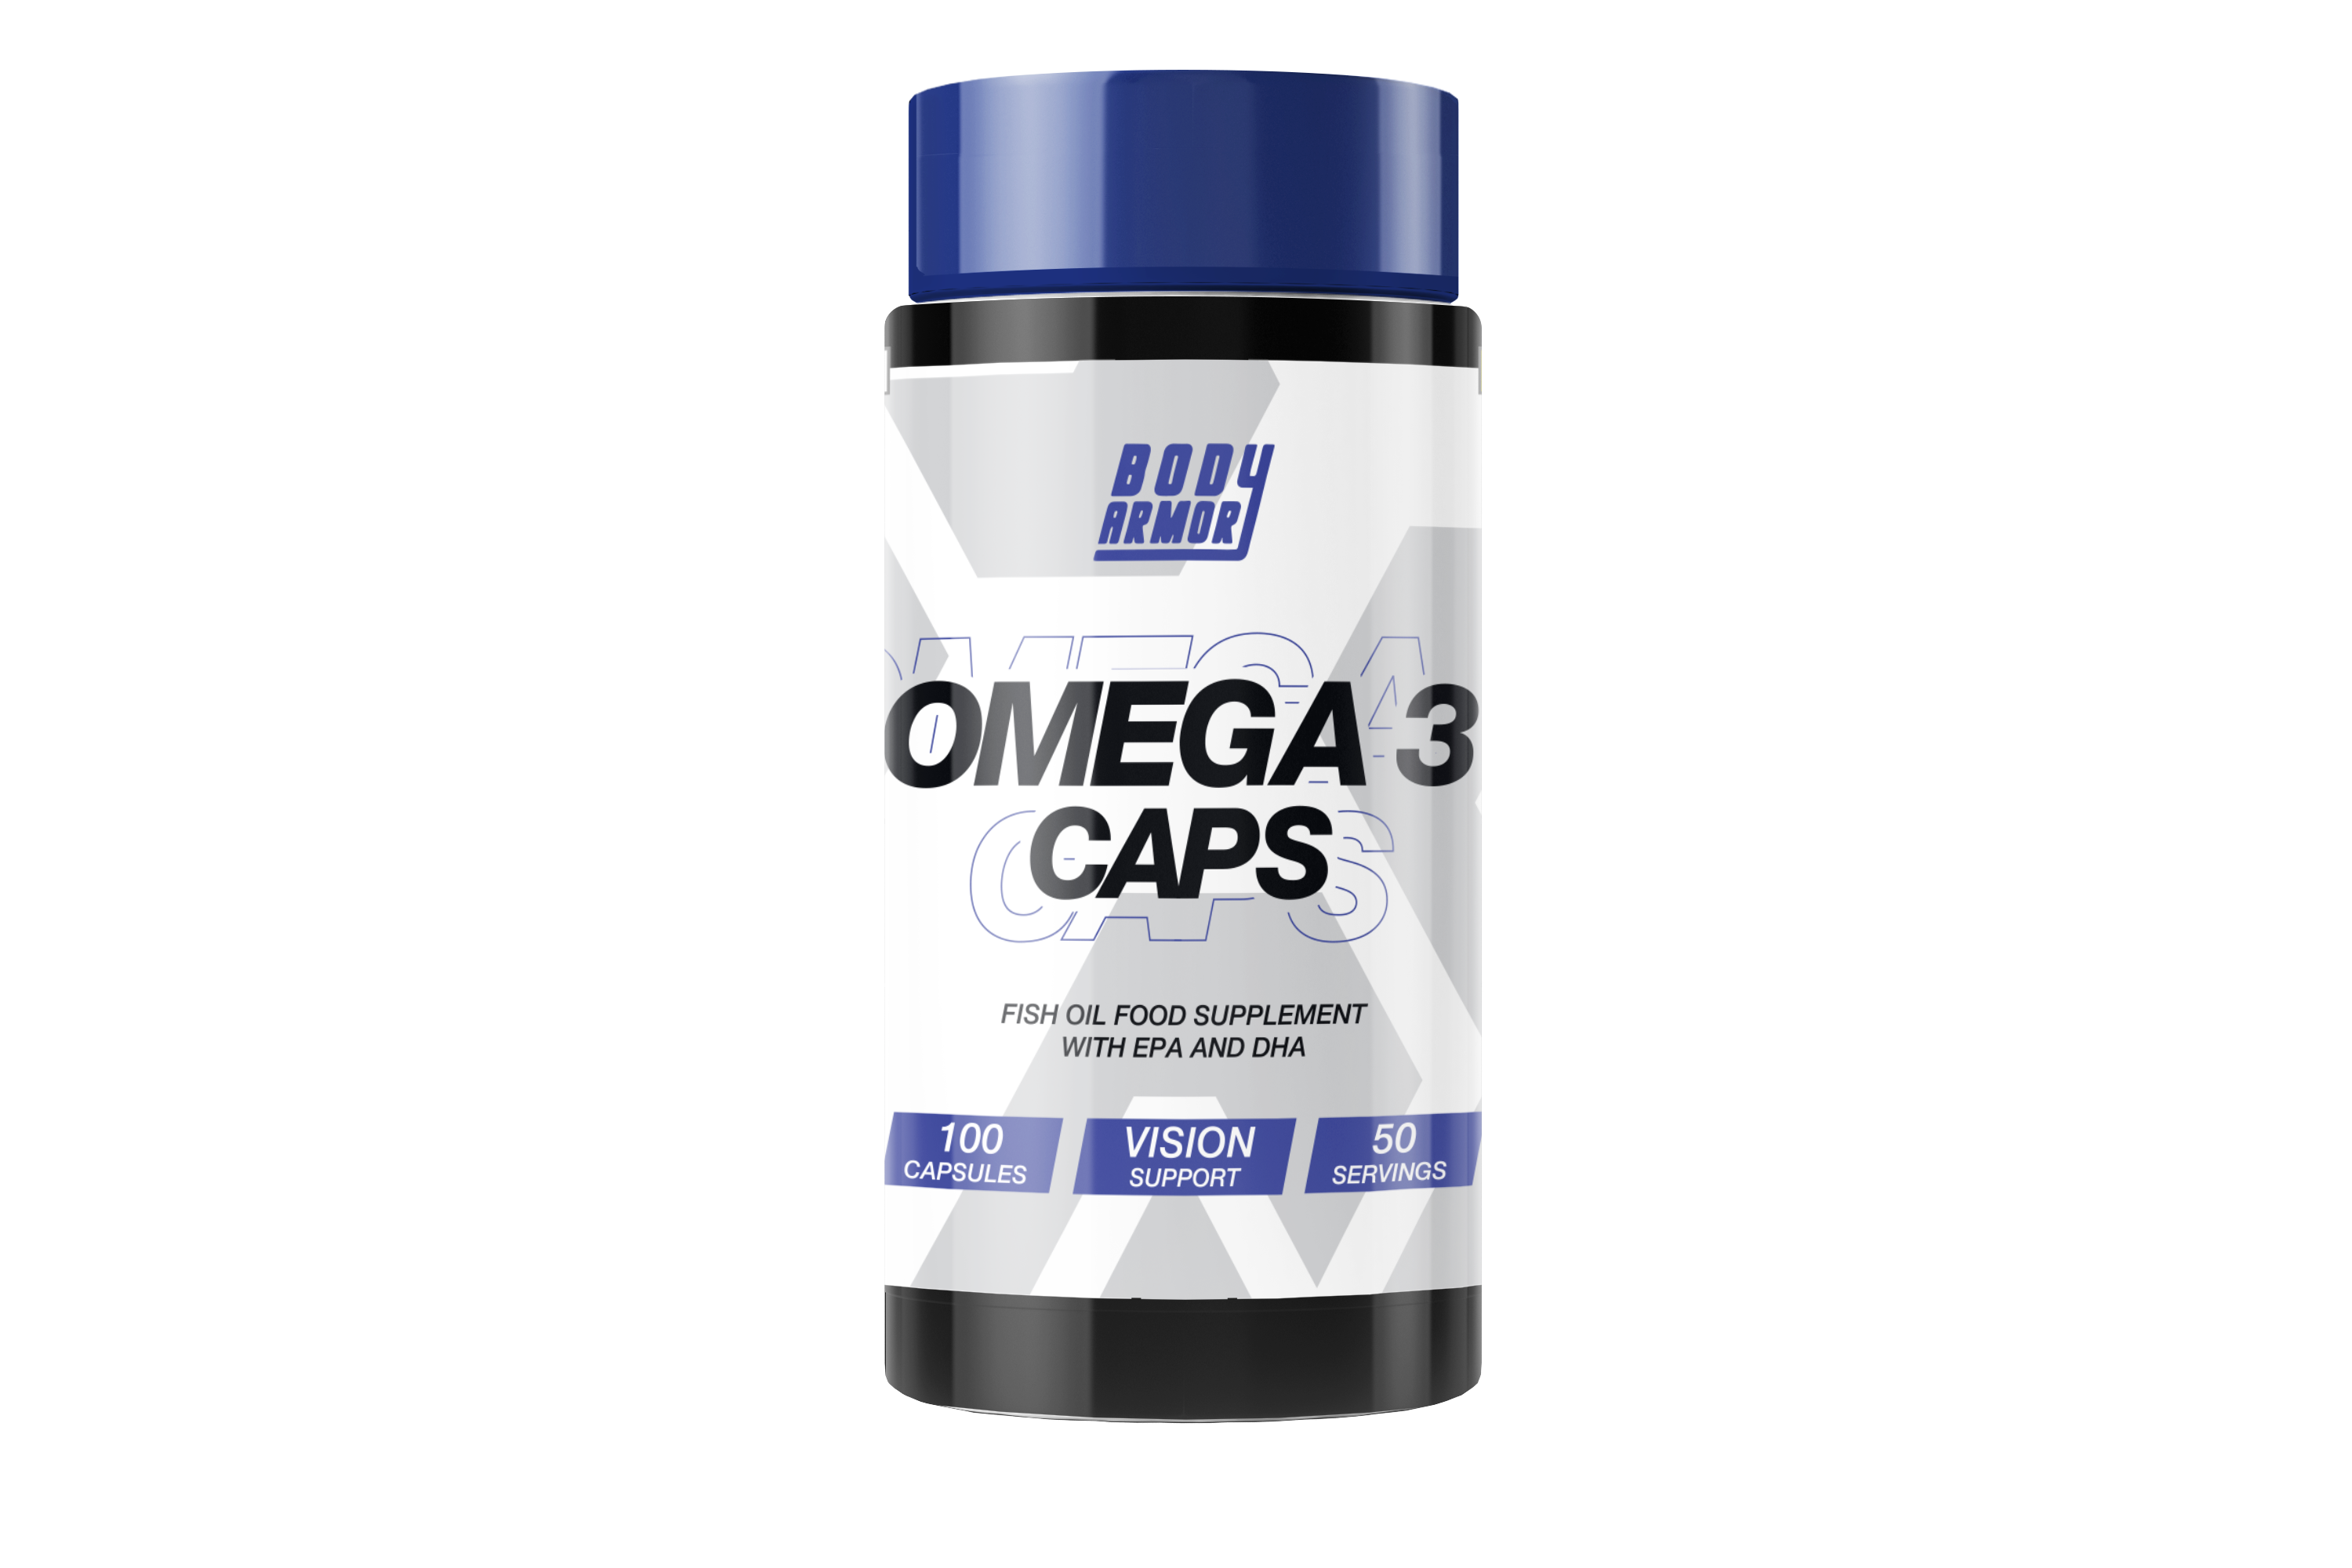 Body Armor Omega 3 – Fish Oil Food Supplement with EPA and DHA